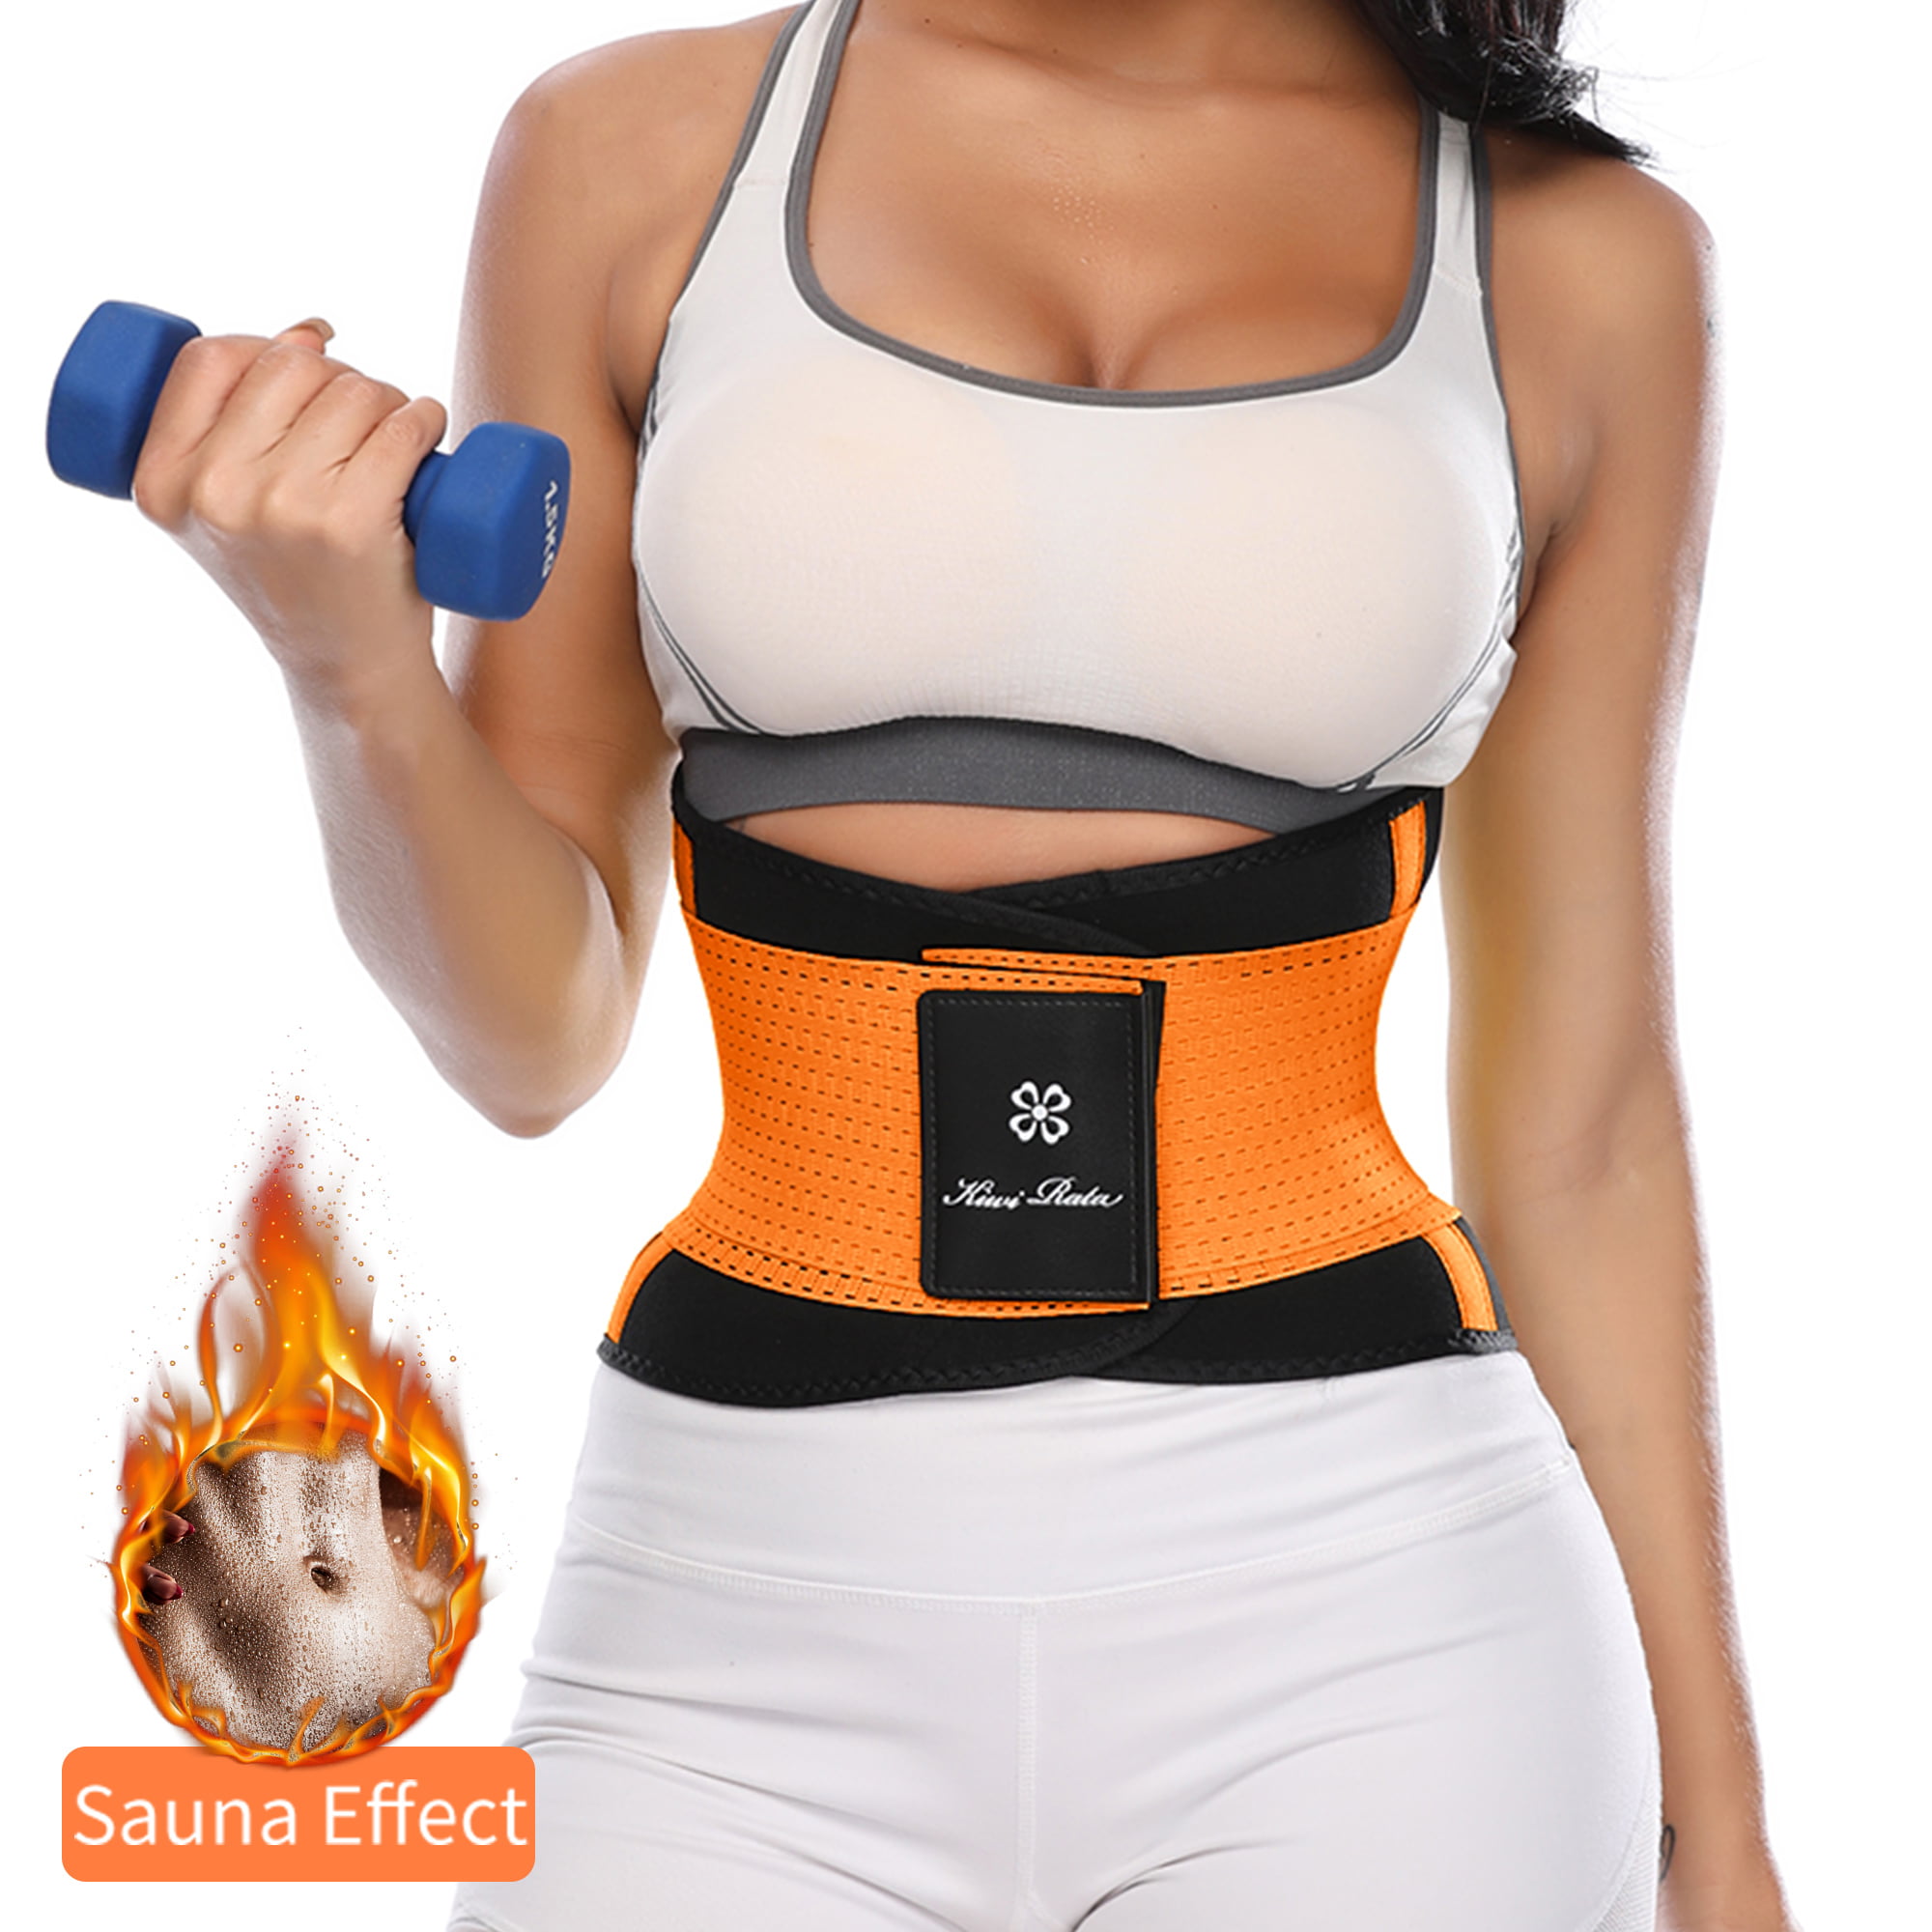 Breathable Xtreme Power Belt Hot Sport Body Shaper Waist Trainer All-Day Wrap AM